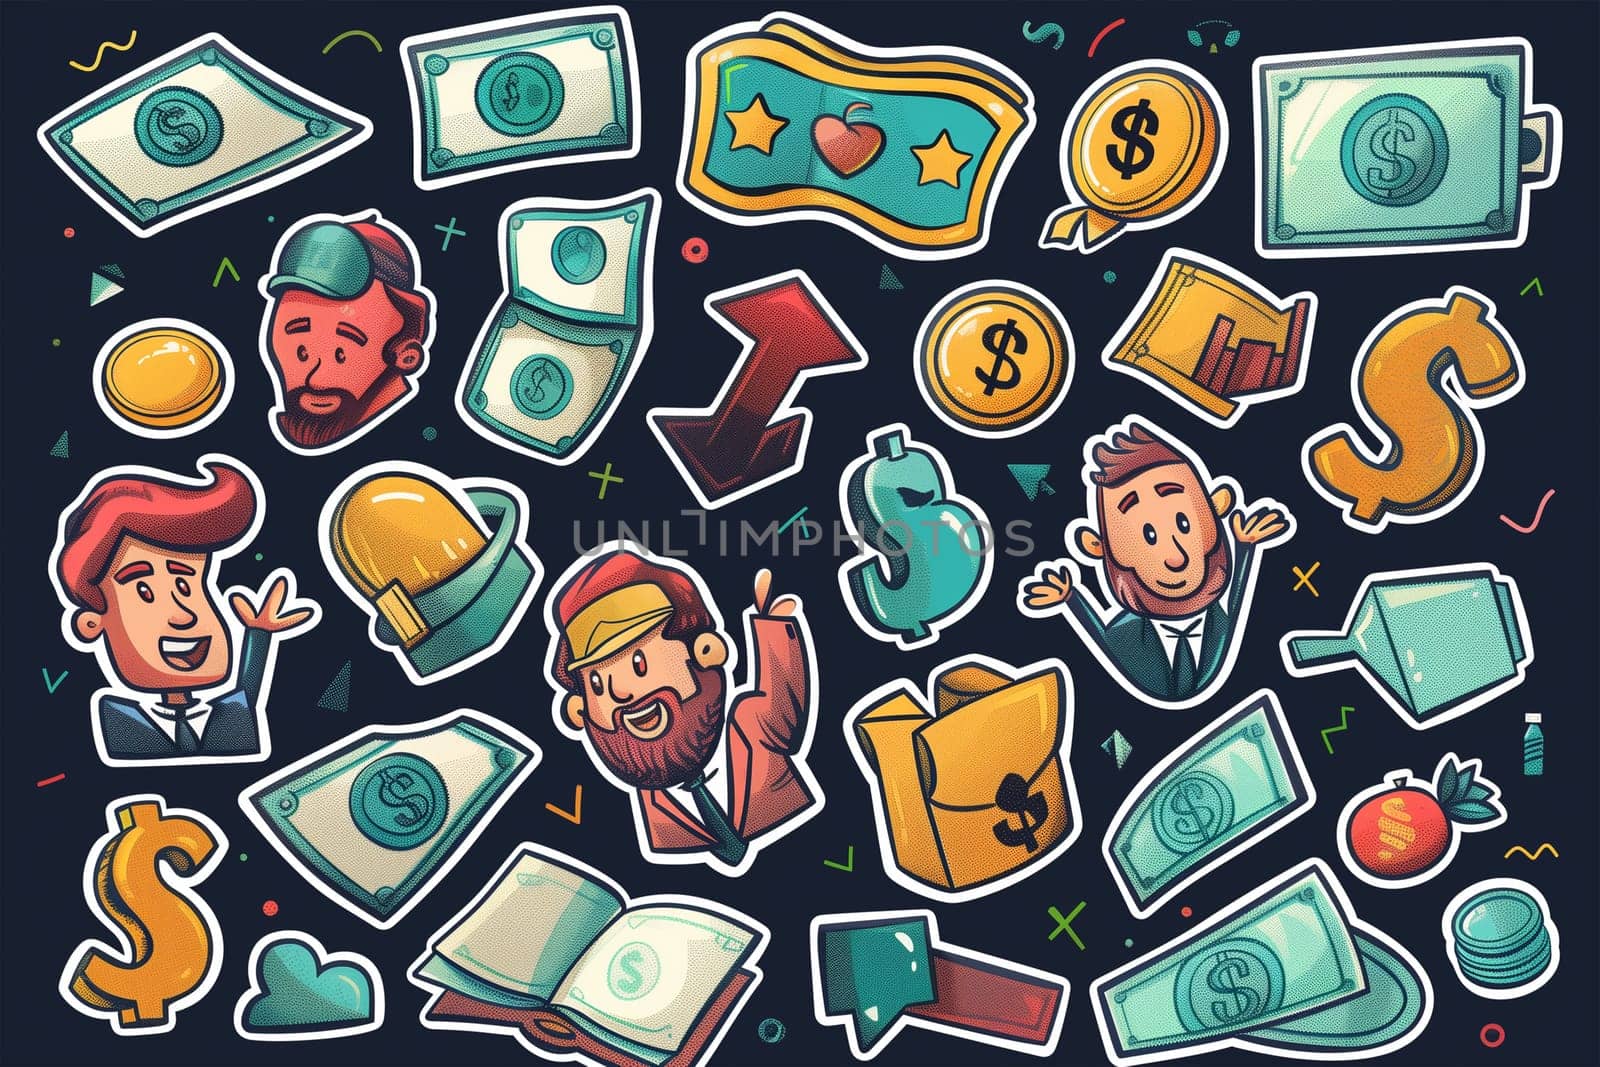 Set of Money Icons on Dark Background by Sd28DimoN_1976